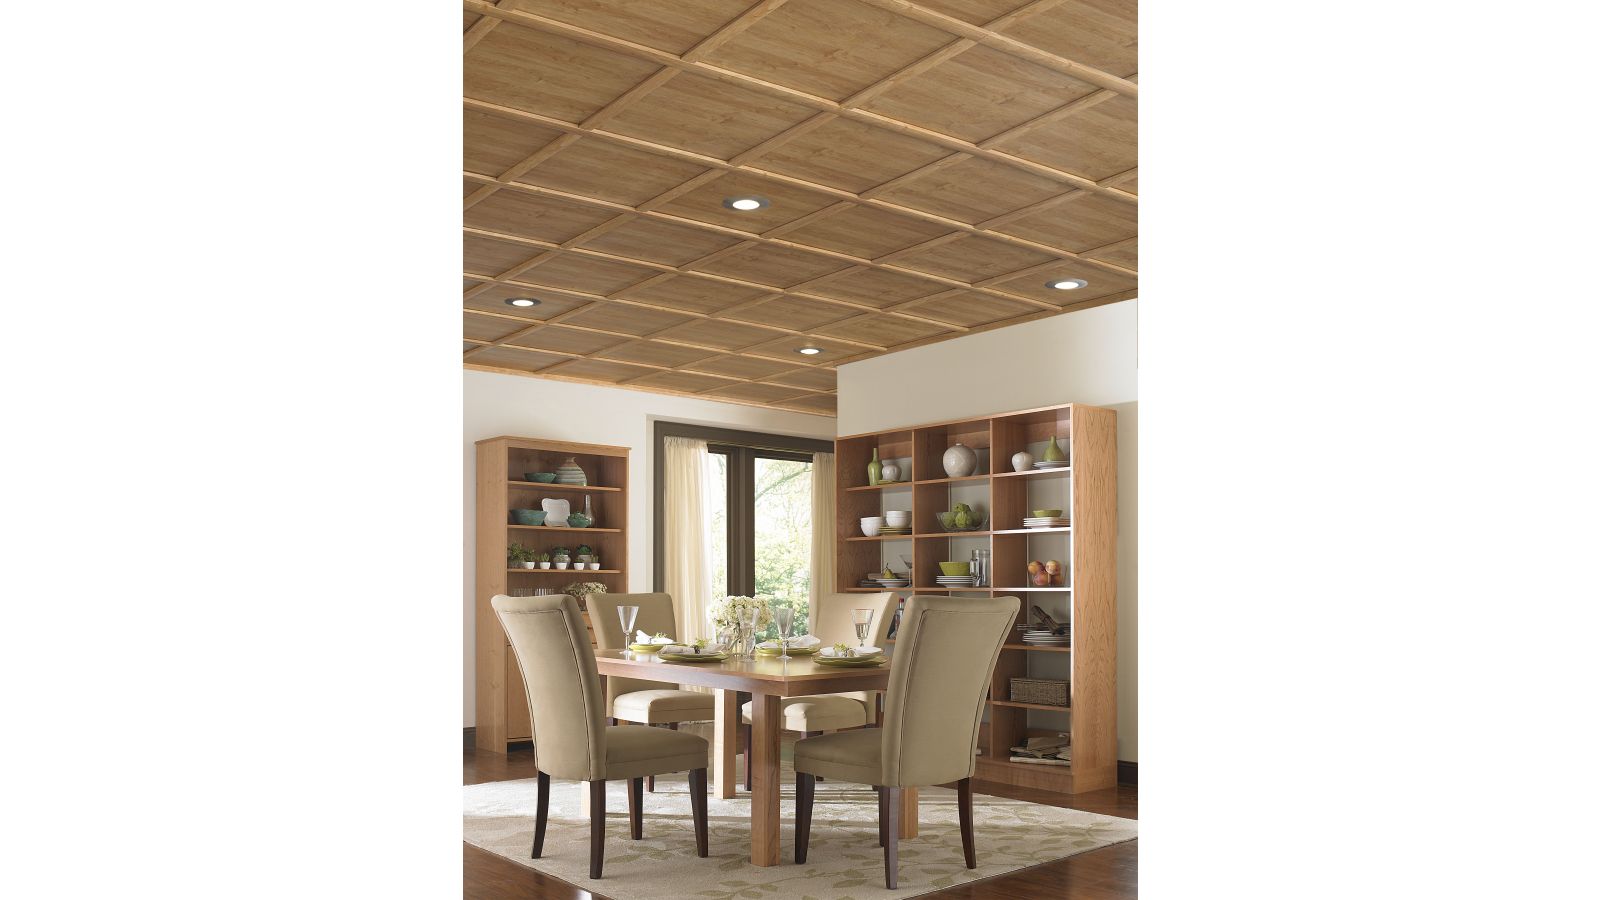 WoodTrac Ceiling Systems